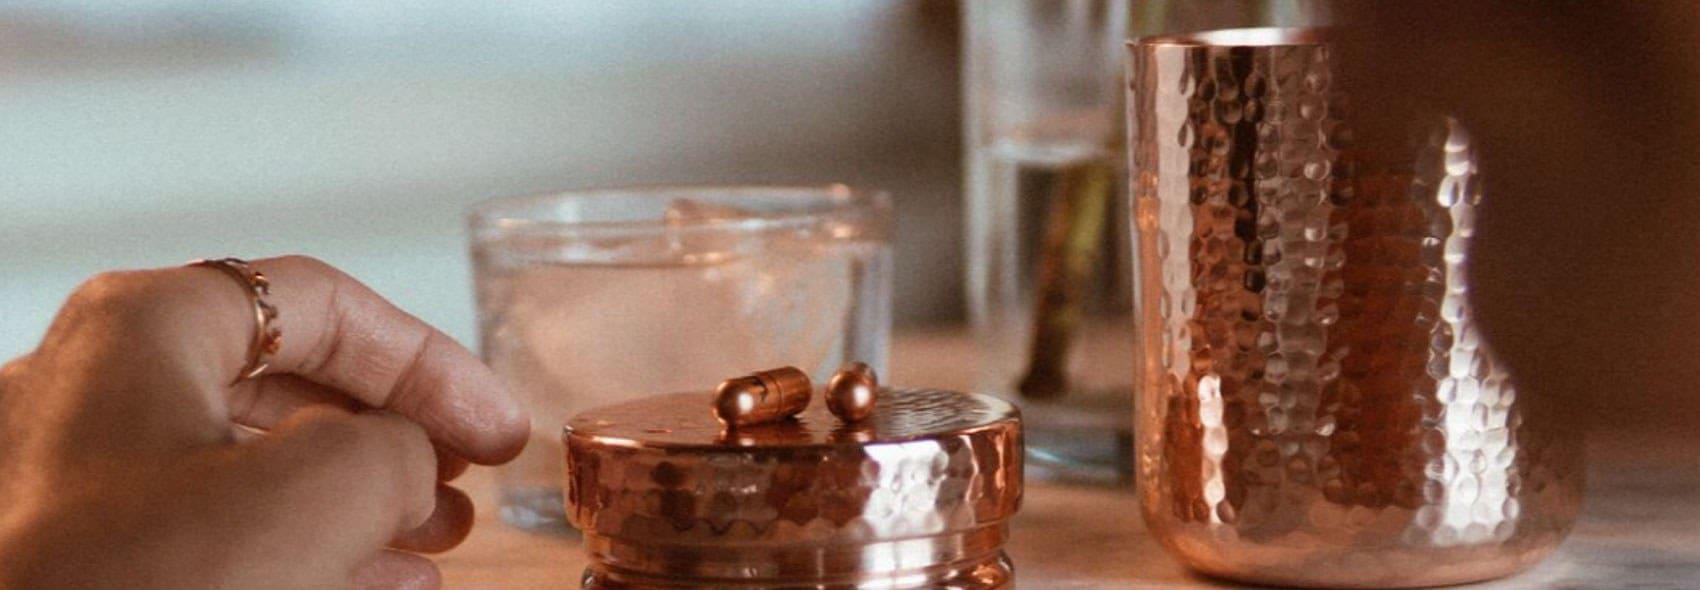 Boost mood copper pill container near water glass